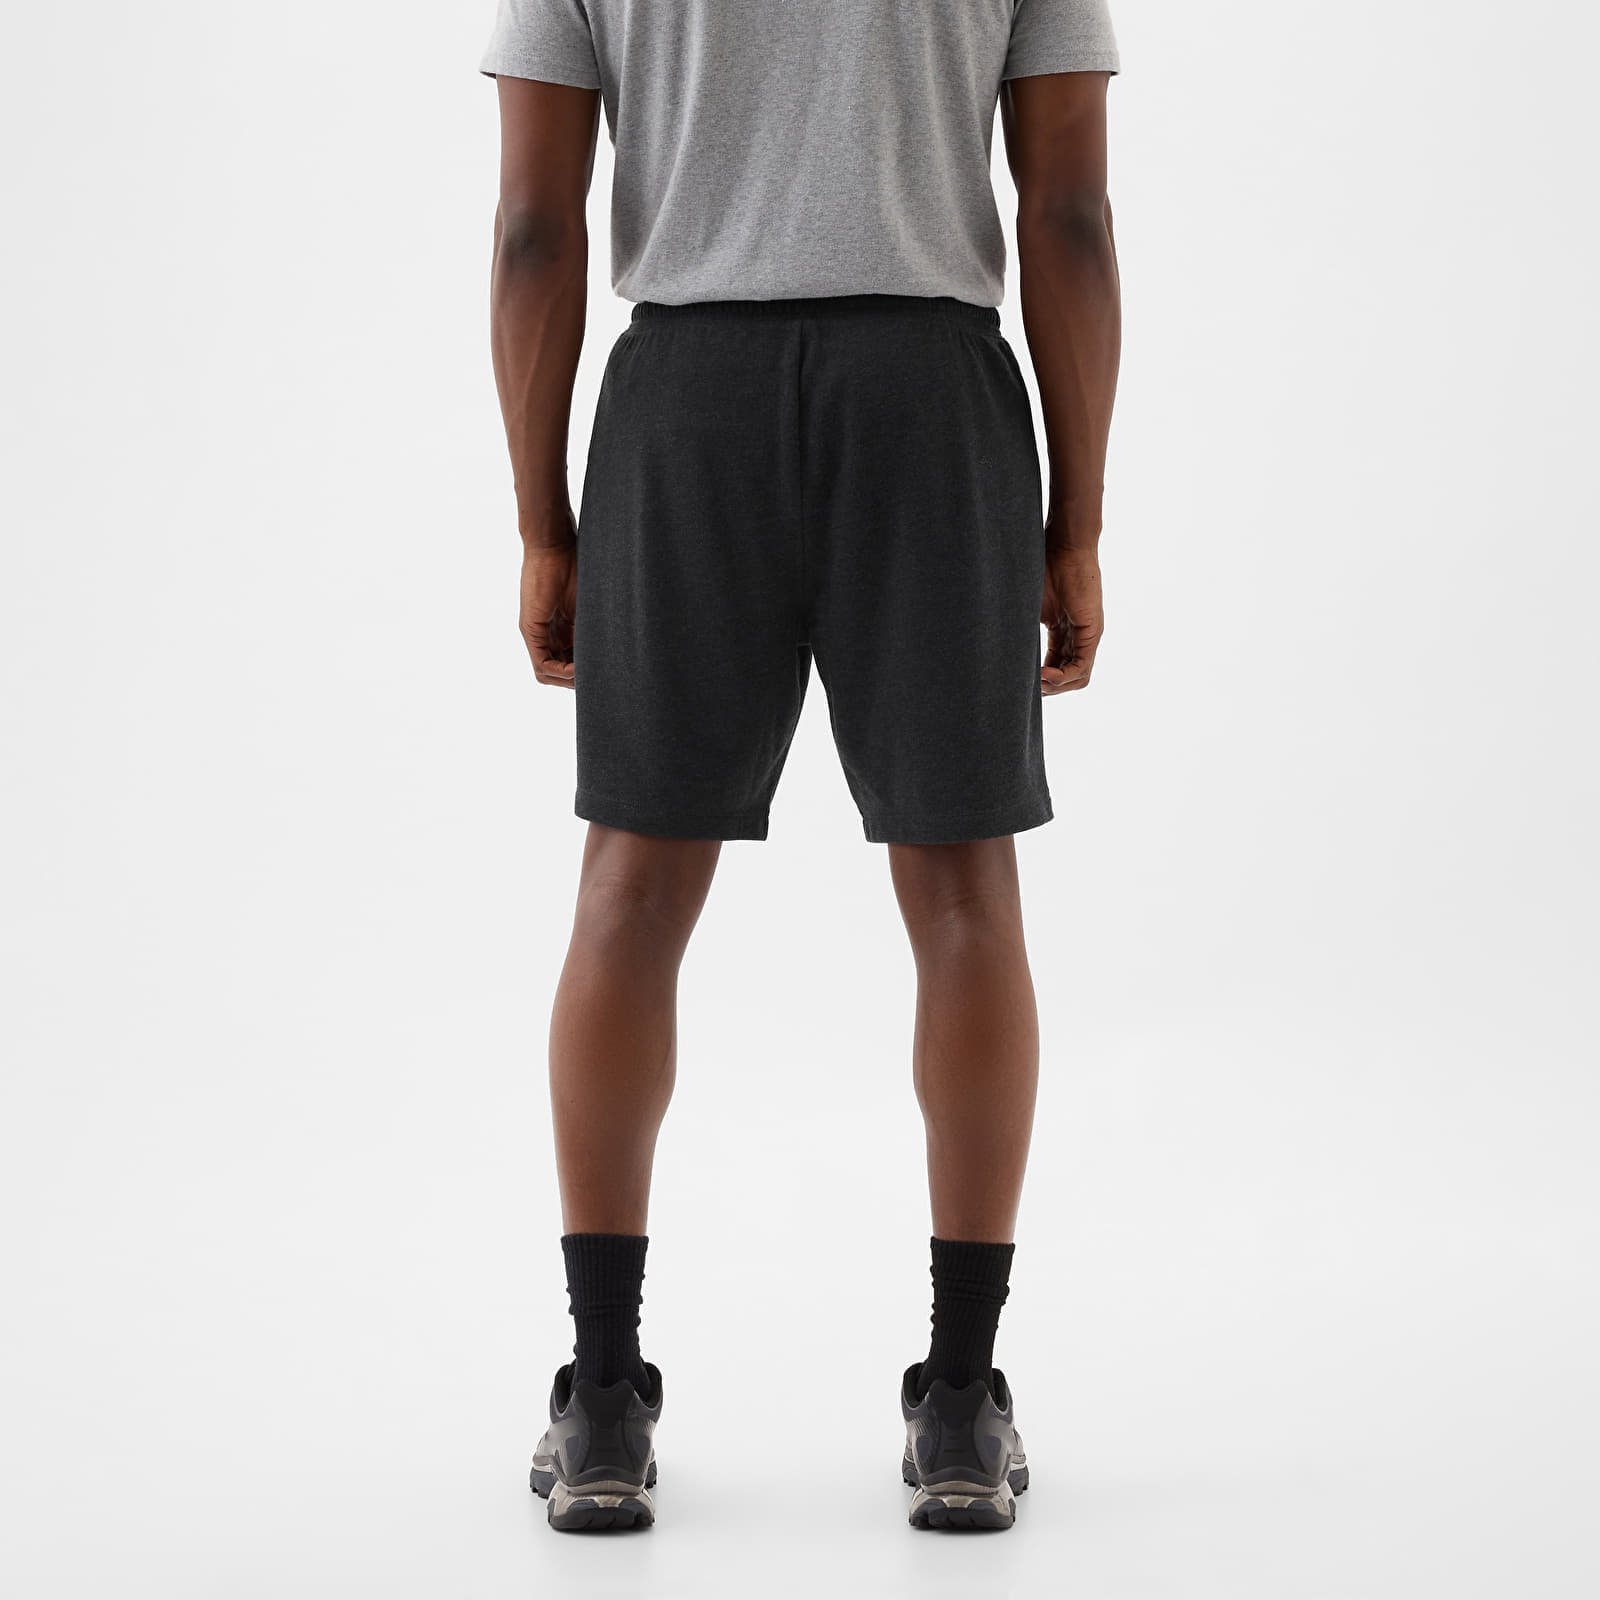 French Terry Logo Shorts B85 Charcoal Heather Grey